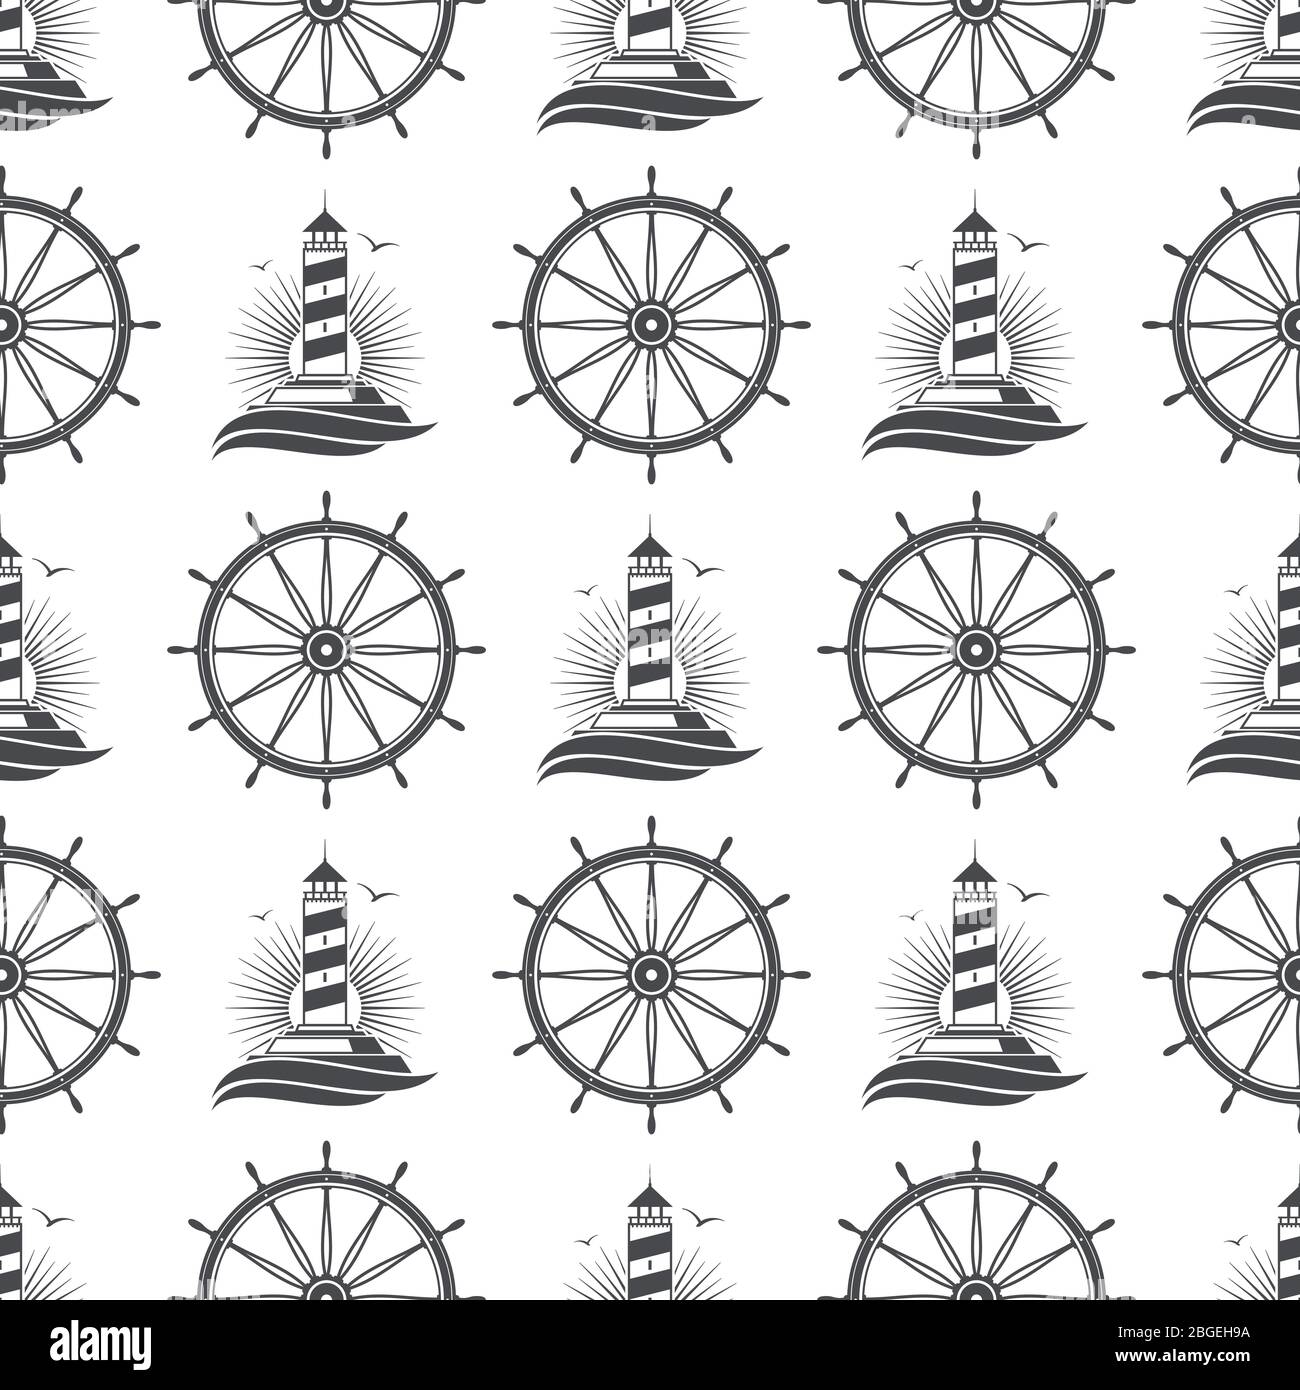 Marine nautical seamless pattern background design with vintage lighthouse and wheel. Vector illustration Stock Vector